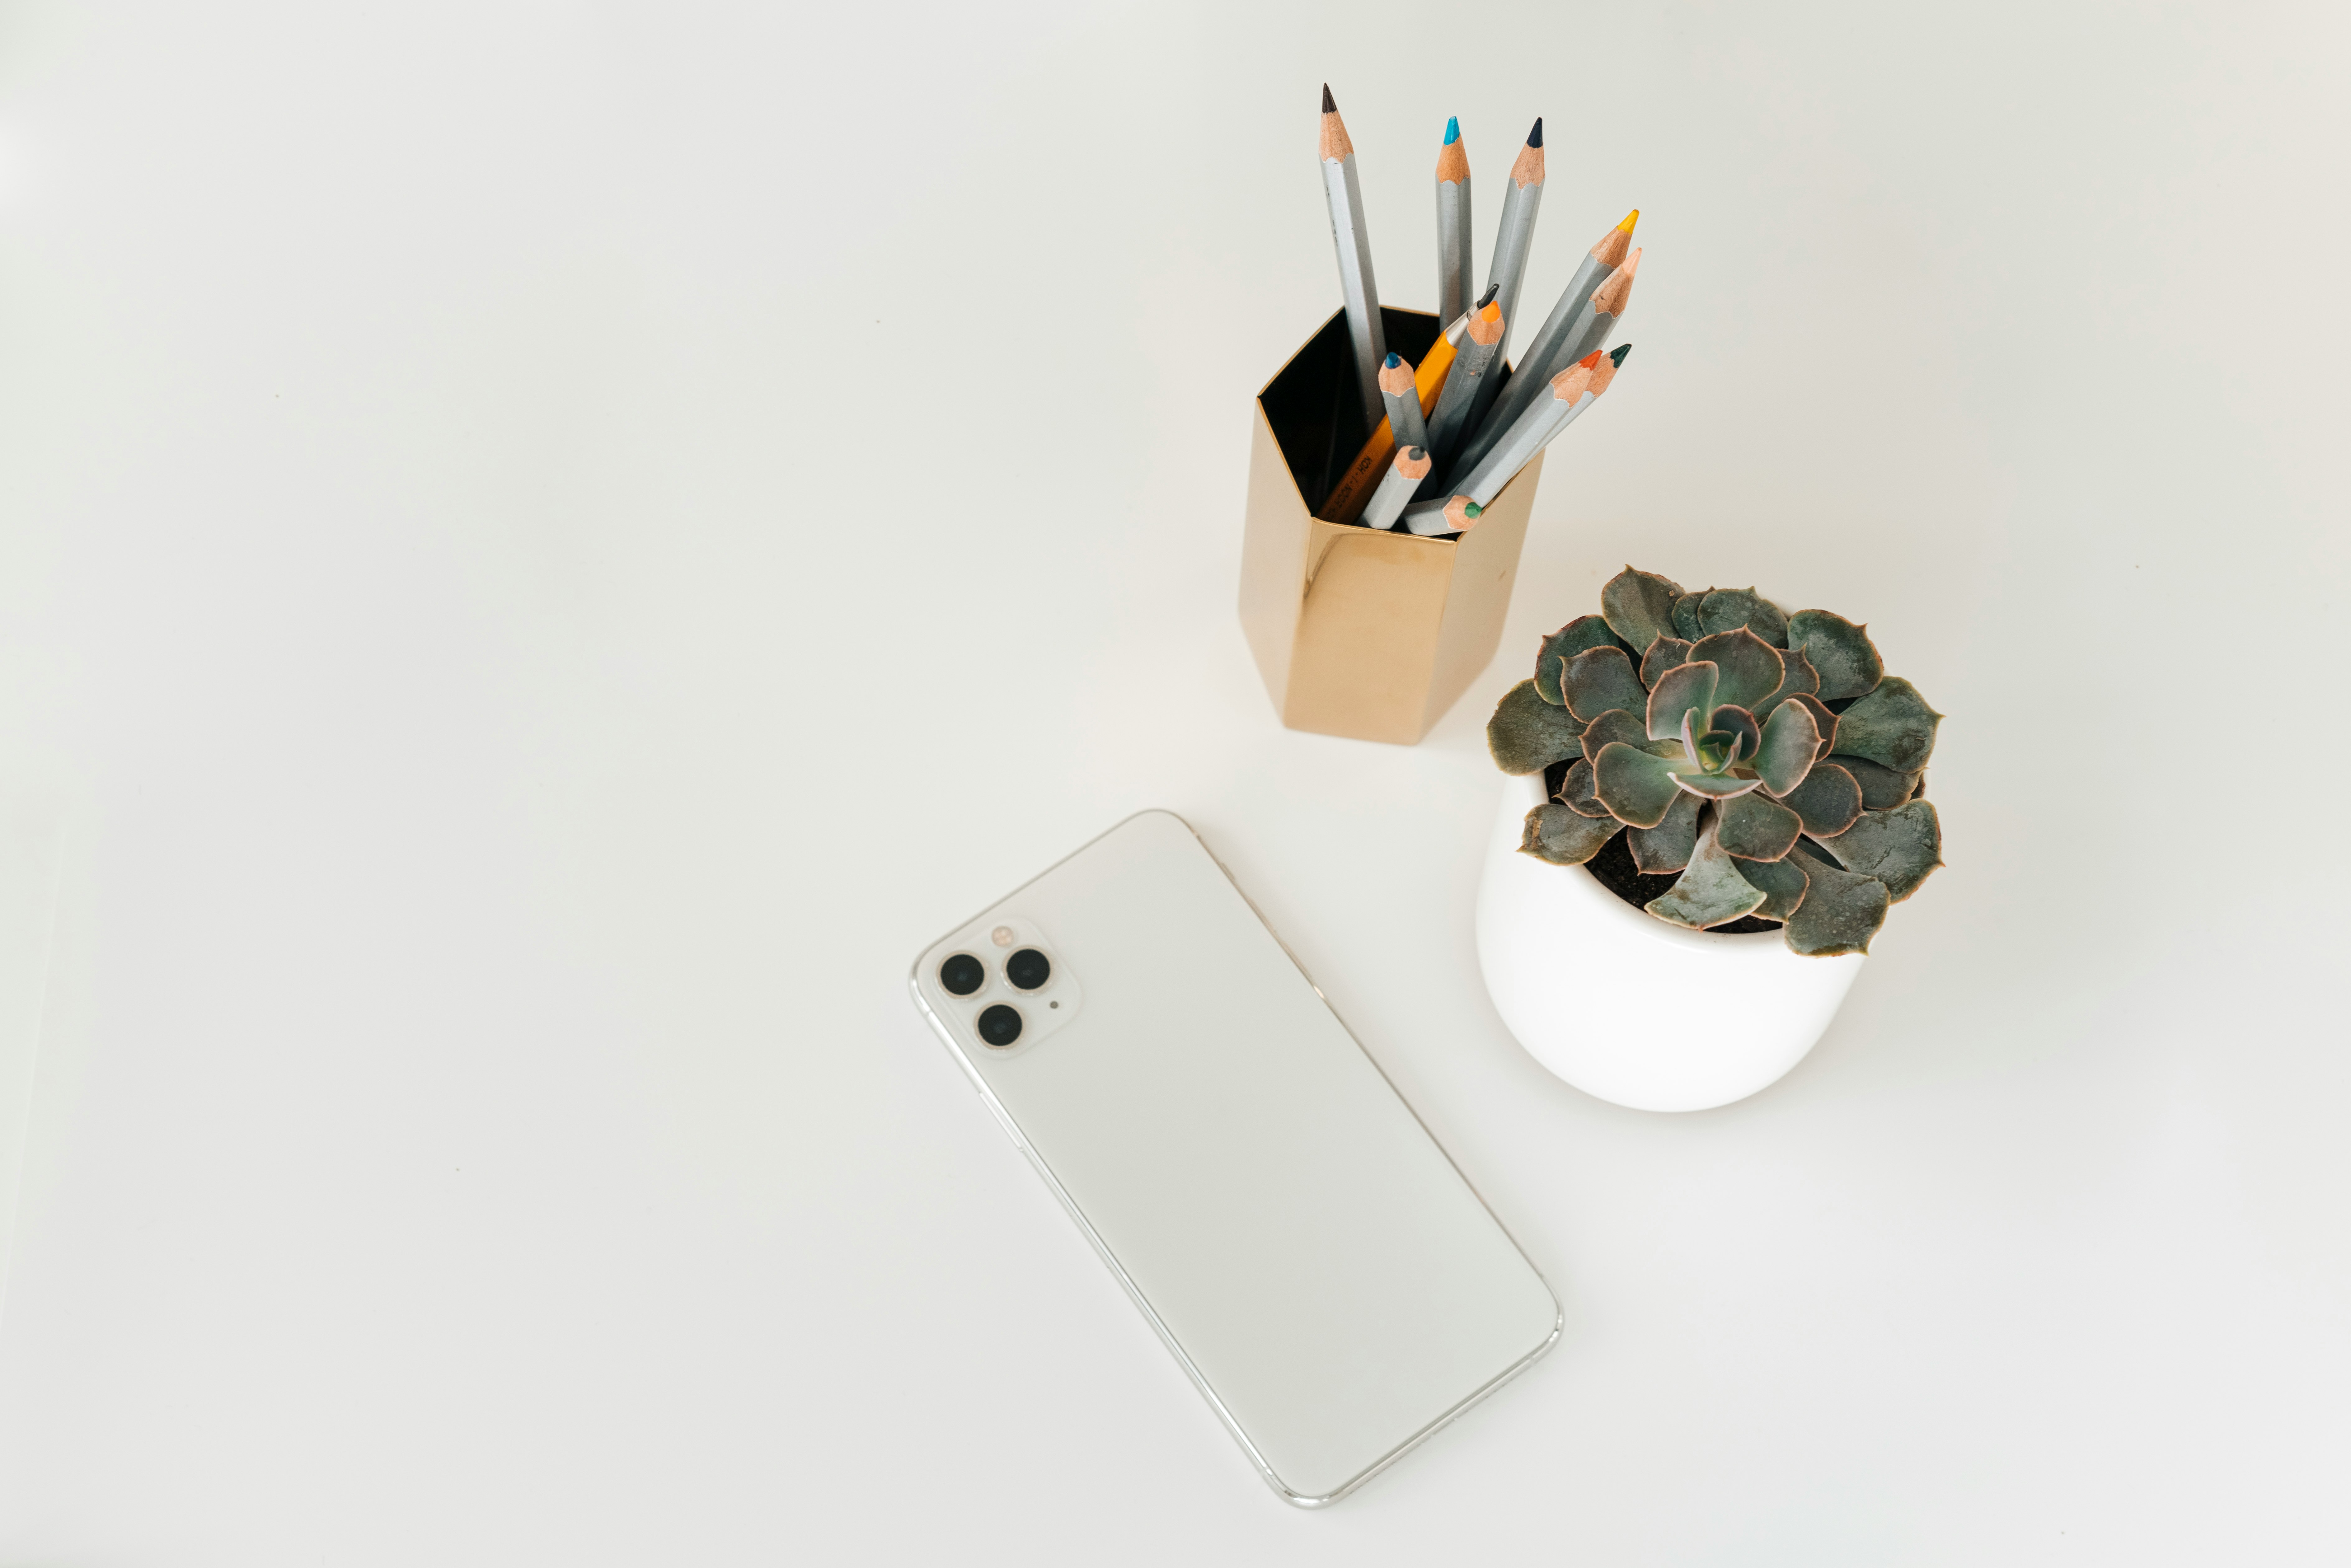 silver iphone 6 beside white ceramic cup with pencils